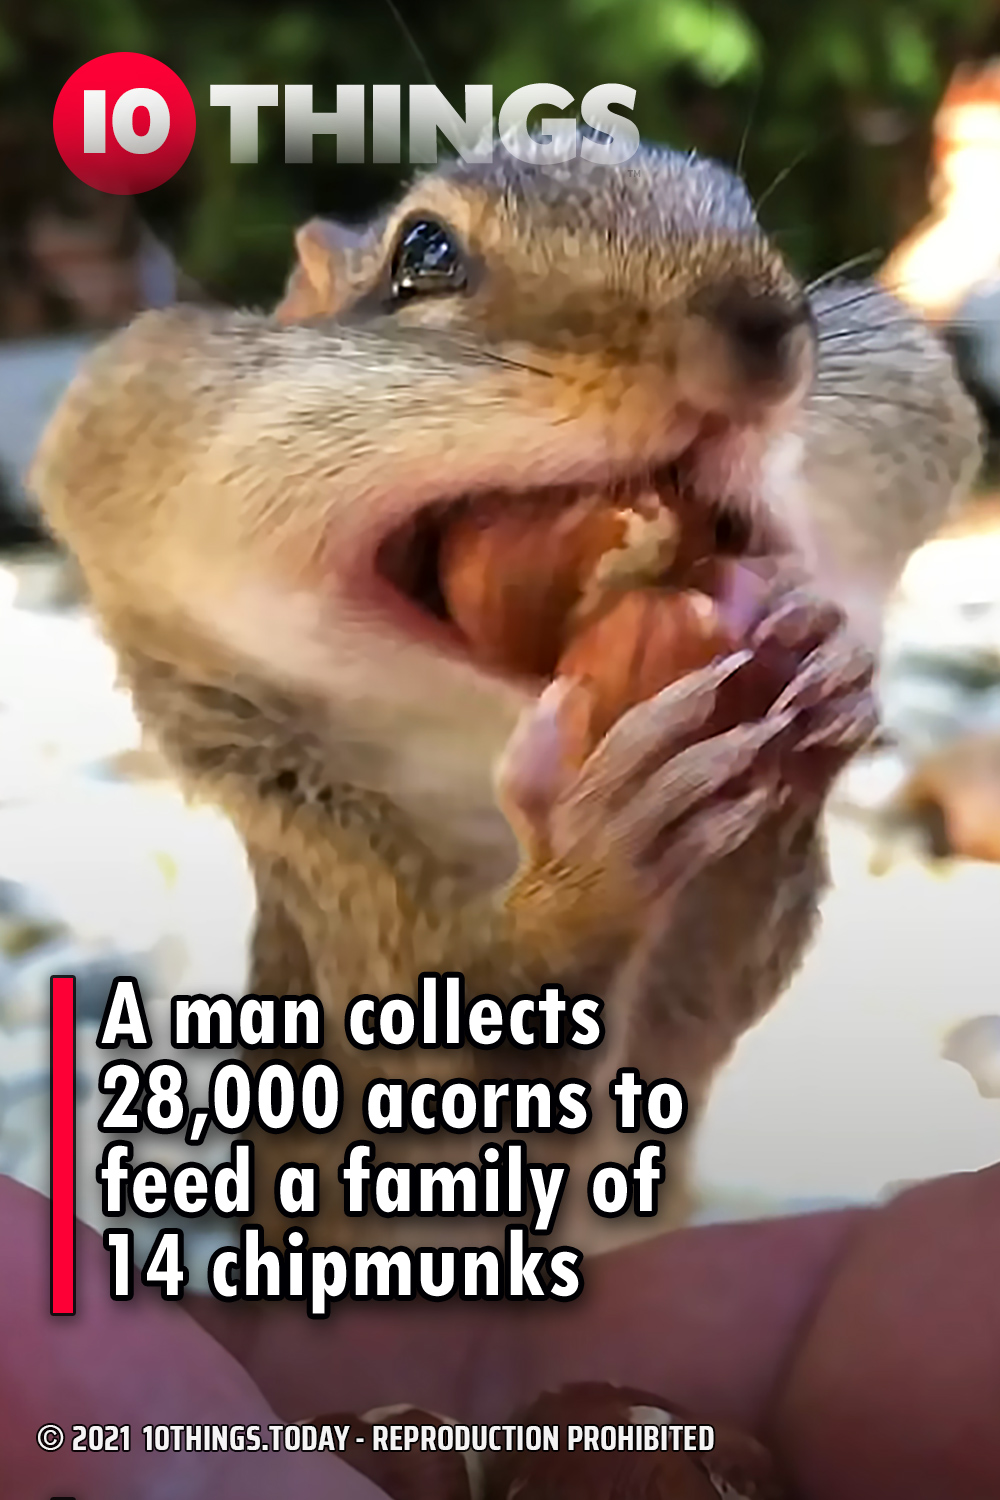 A man collects 28,000 acorns to feed a family of 14 chipmunks